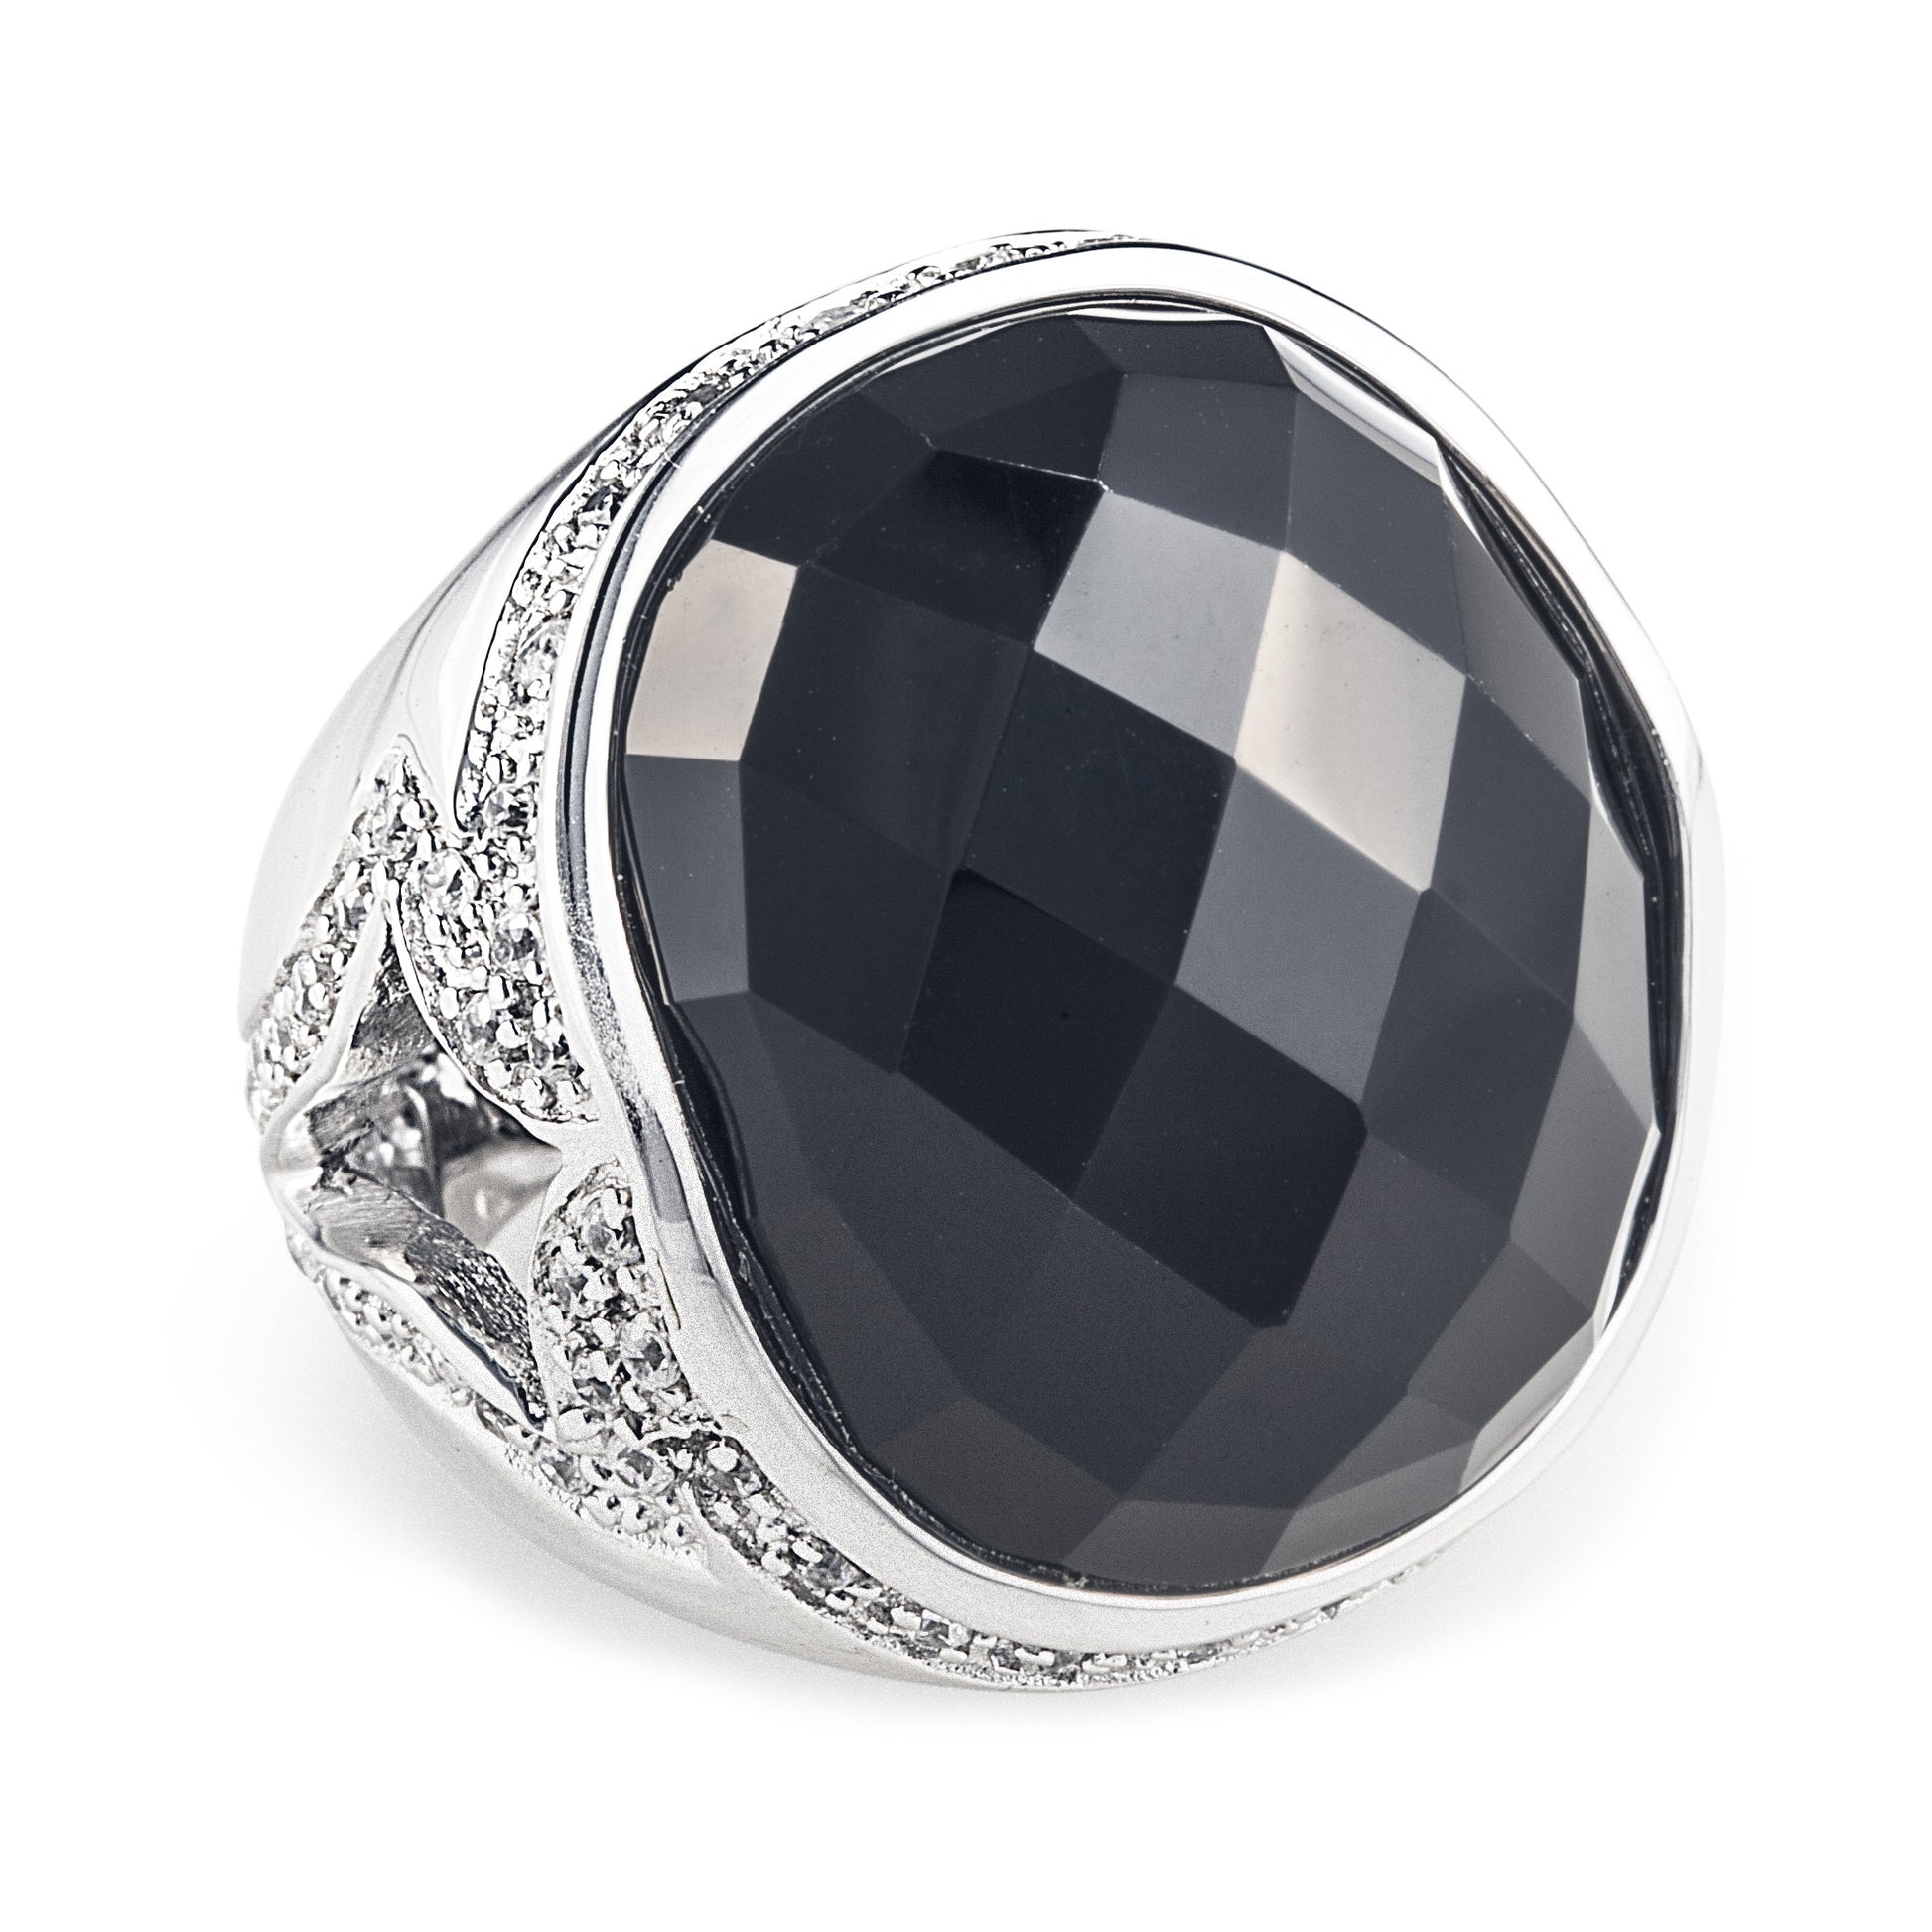 The Black Night Lopez Ring is an elegant 925 sterling silver ring featuring a beautiful side pattern encrusted with cubic zirconia stones that hold in place a stunning facet cut black onyx that grabs lots of attention. Worldwide Shipping. Free shipping for orders over $150.00 within Australia.